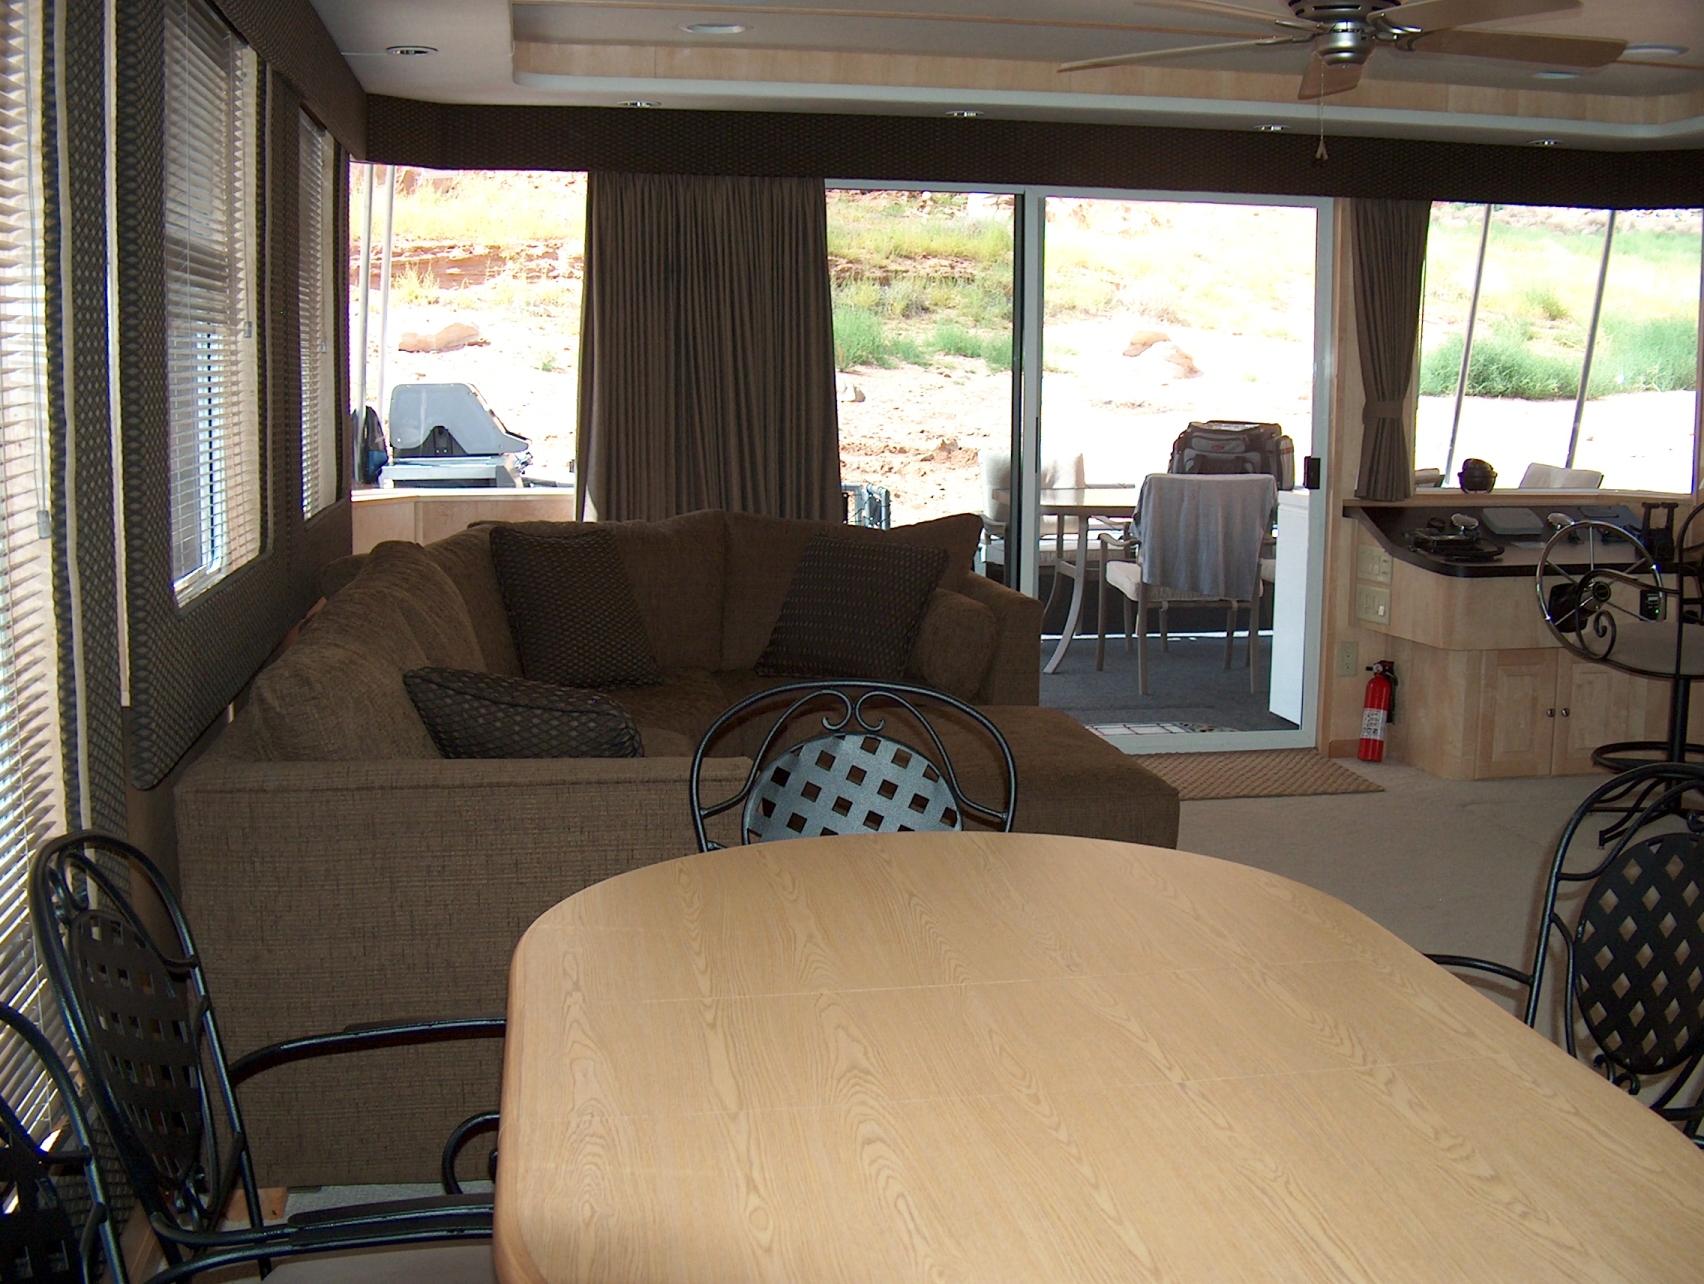 2005 Stardust Cruisers Multi Owner Houseboat